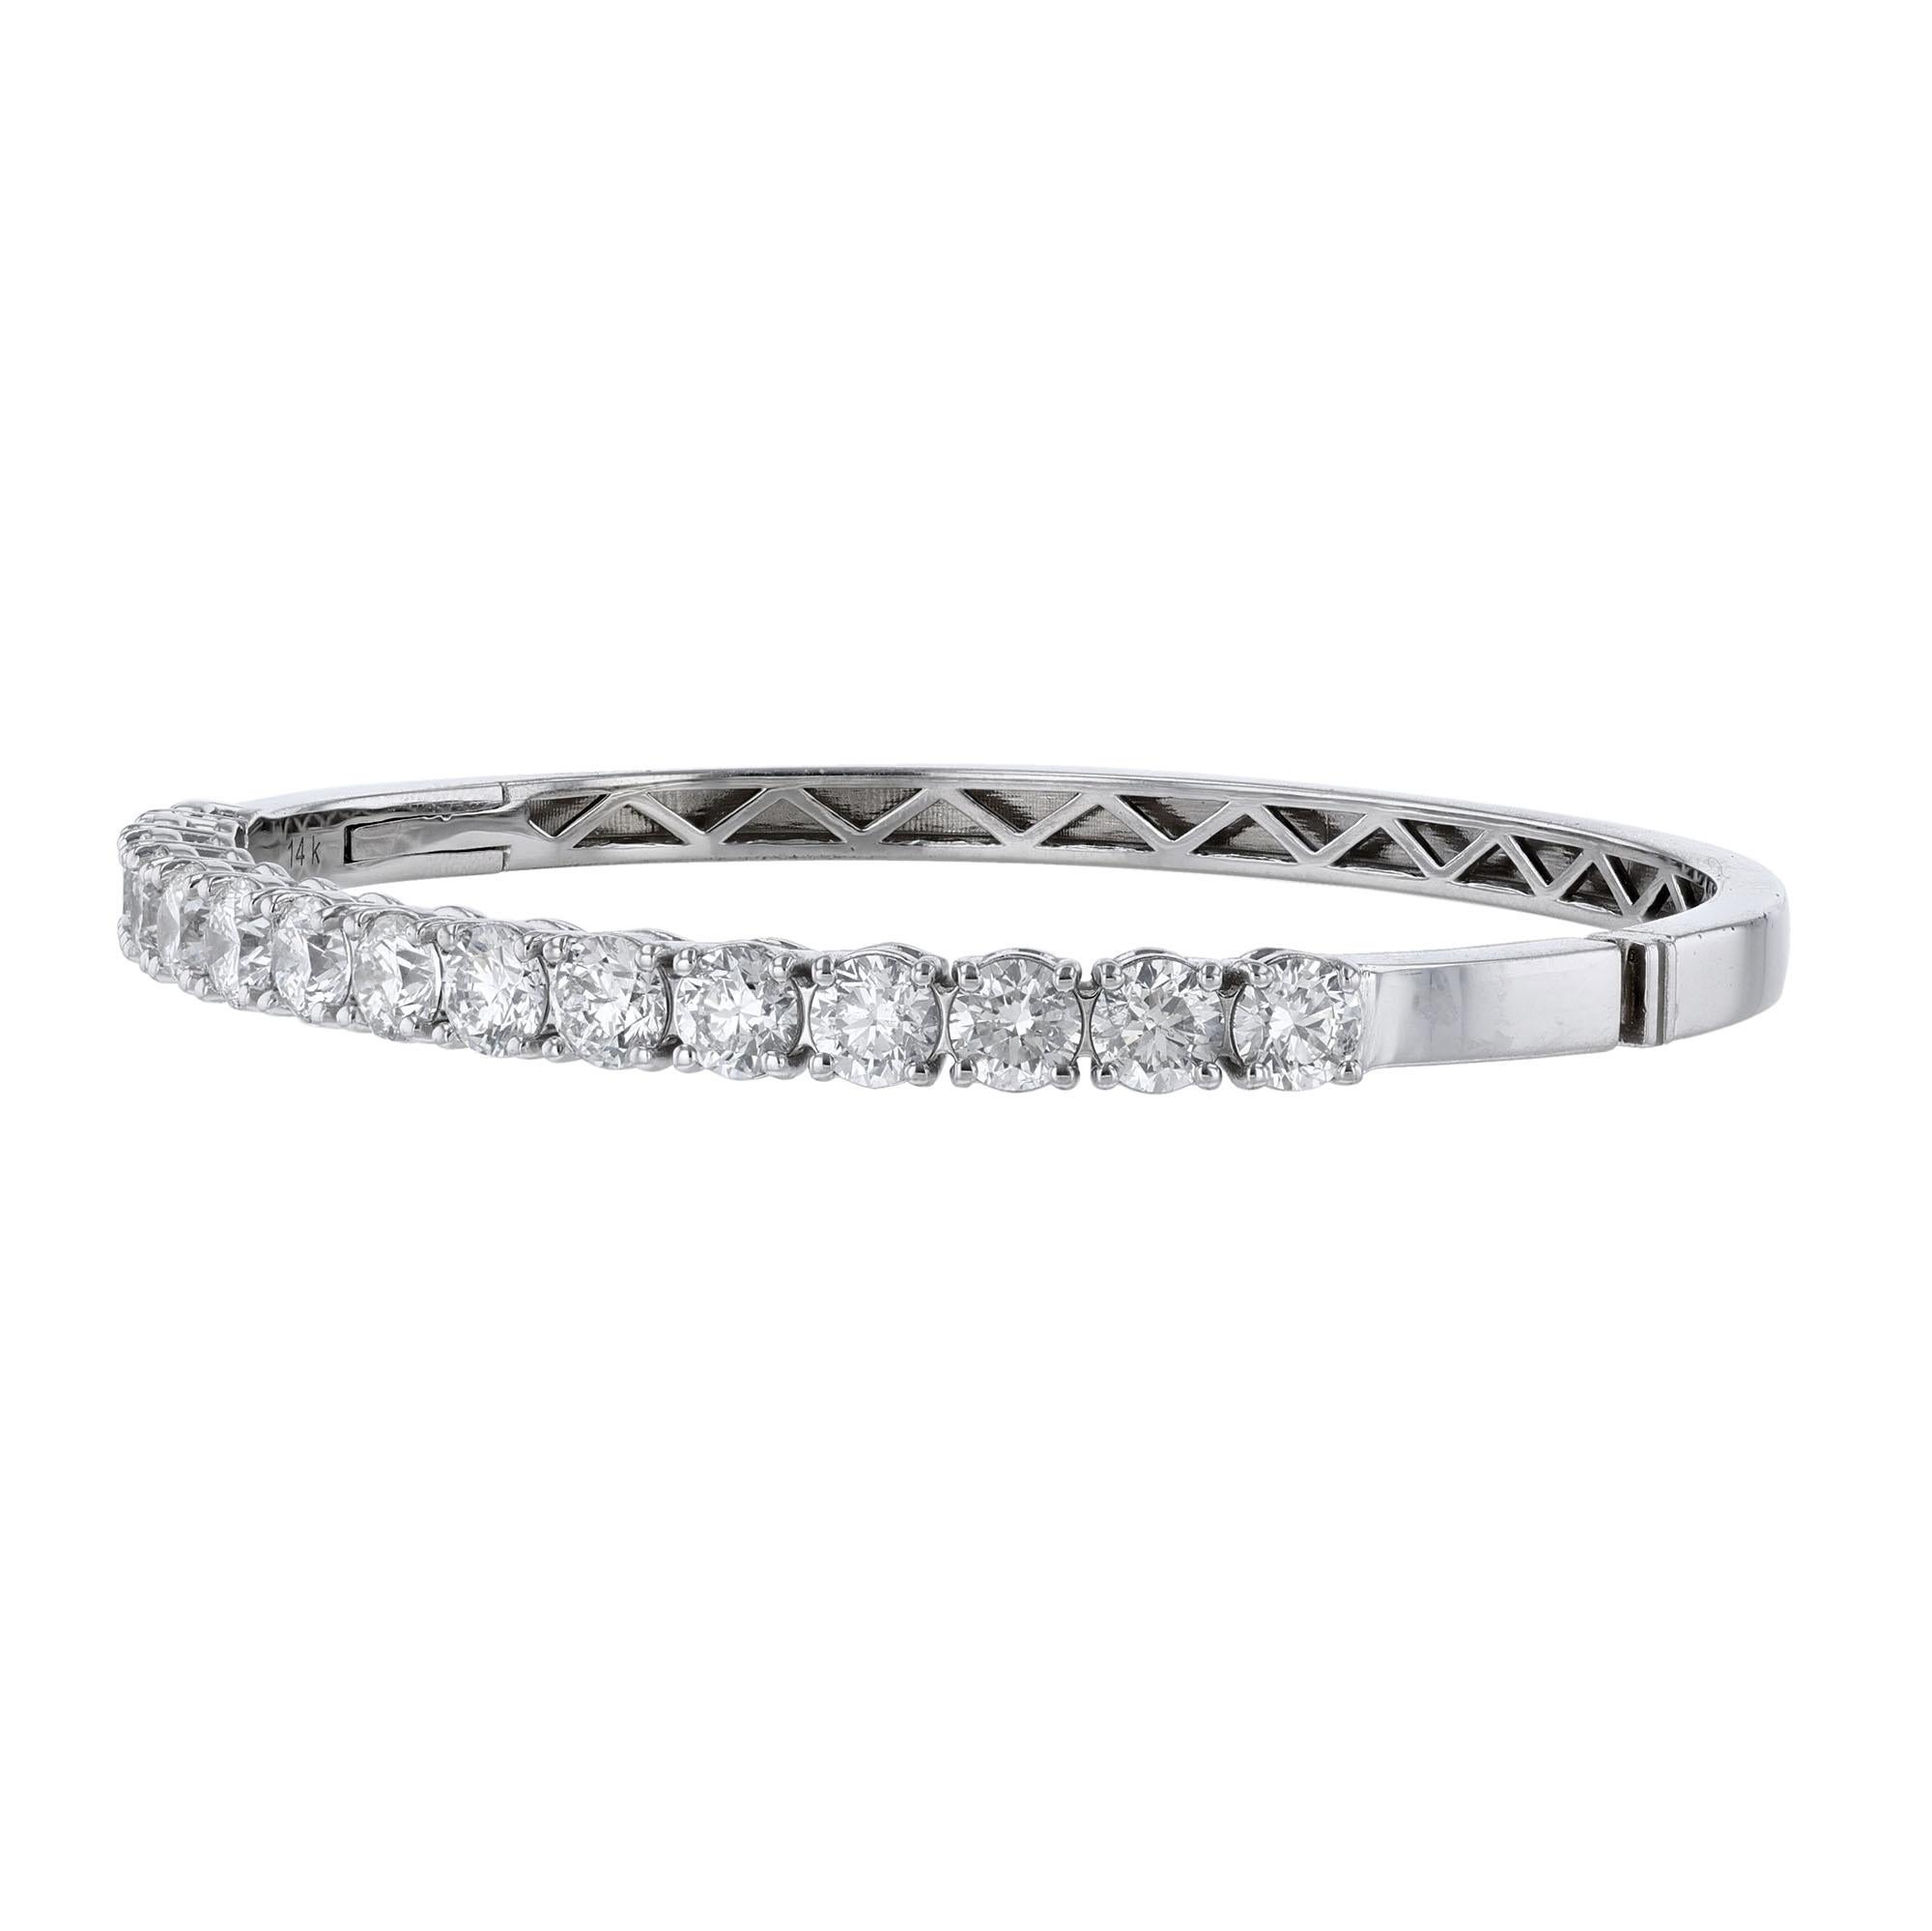 This bangle is made in 14K white gold and features 15 round cut diamonds weighing 4.67 carats. This bangle has a color grade (H) and clarity grades of I1 and SI2.
